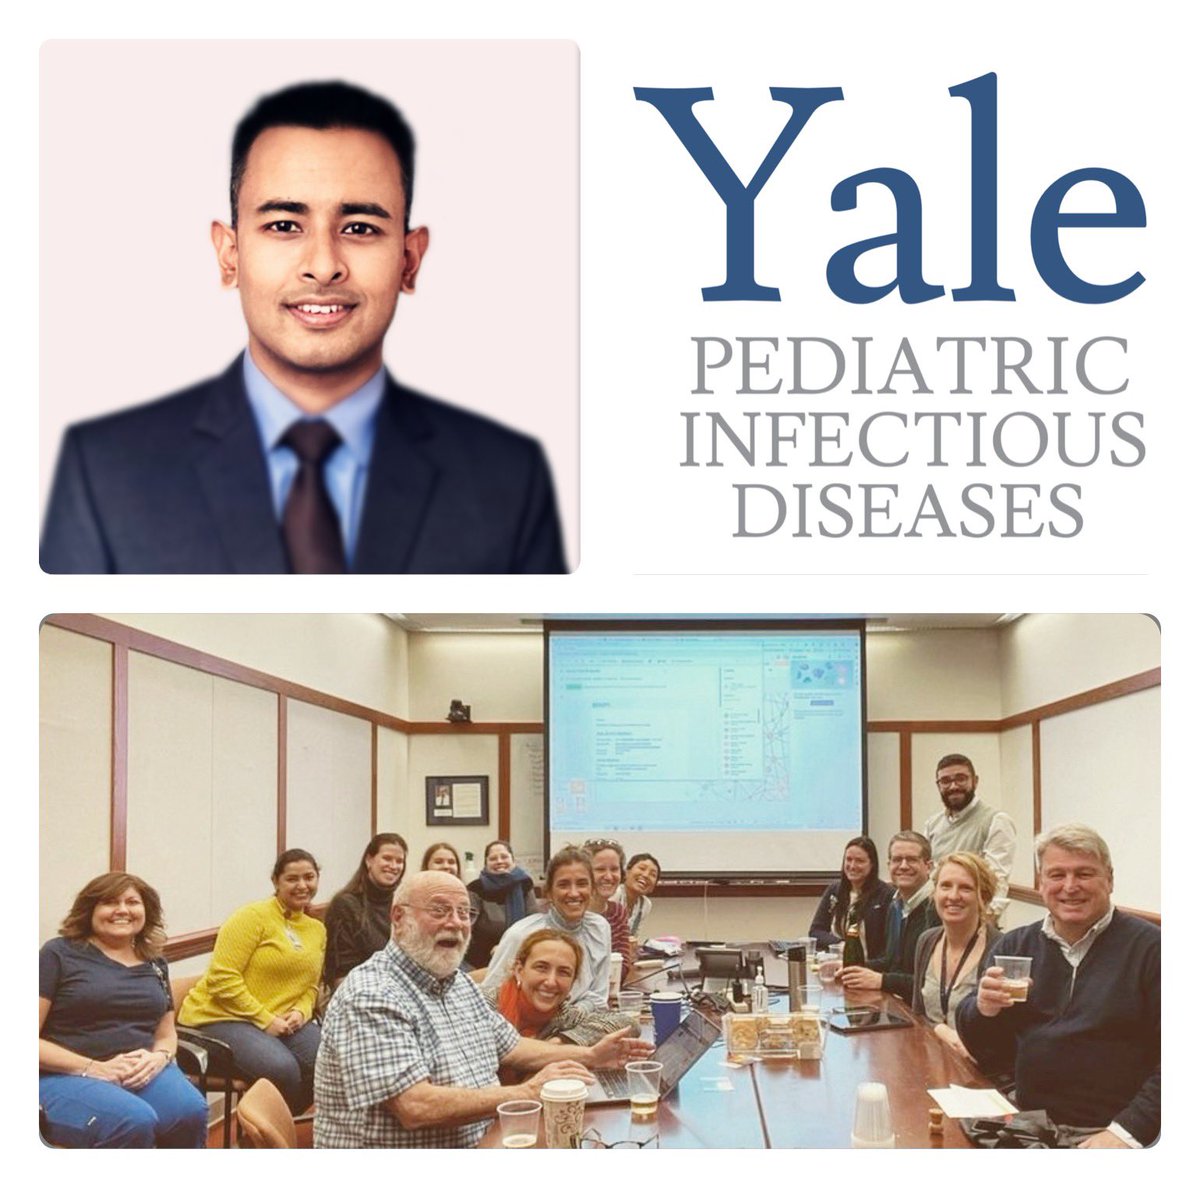 Thrilled to announce Dr. Abhishek Giri will be joining us from @NYCHealthSystem as the new Pediatric Infectious Diseases Fellow at @YalePediatrics. Welcome to the @YalePedsID team! #PedsID